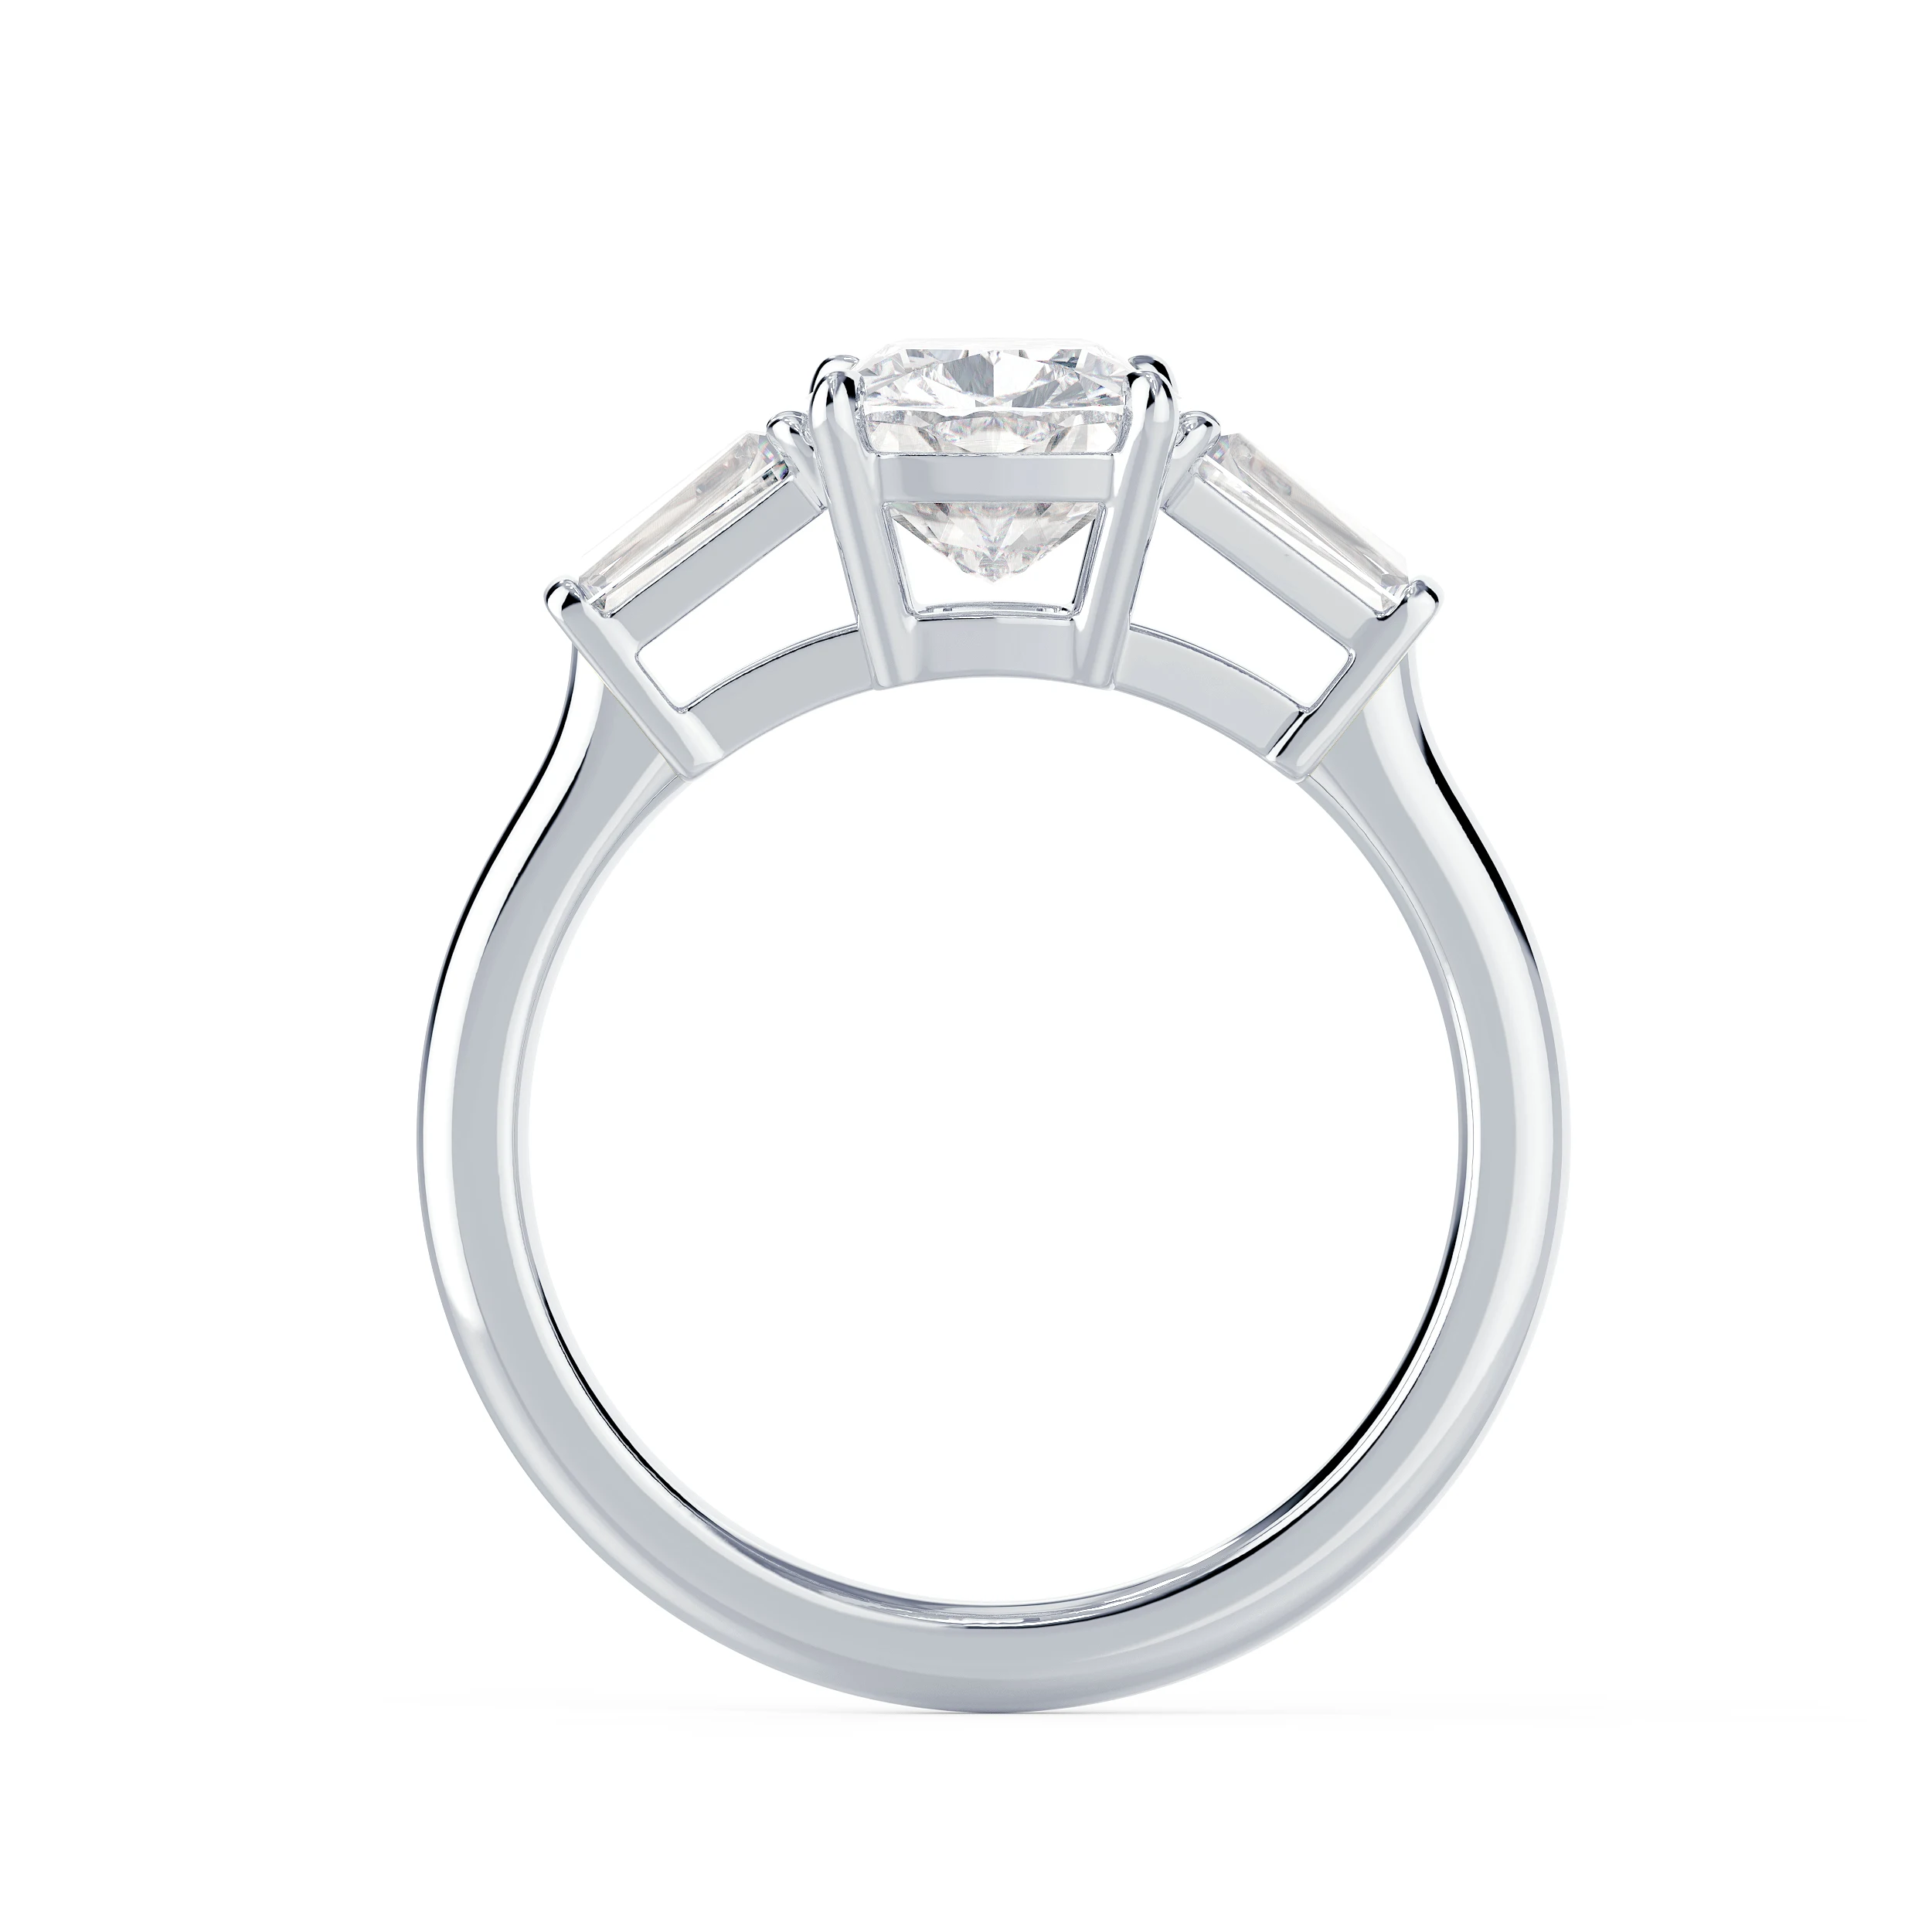 Lab Diamonds Cushion and Baguette Diamond Engagement Ring in White Gold (Profile View)